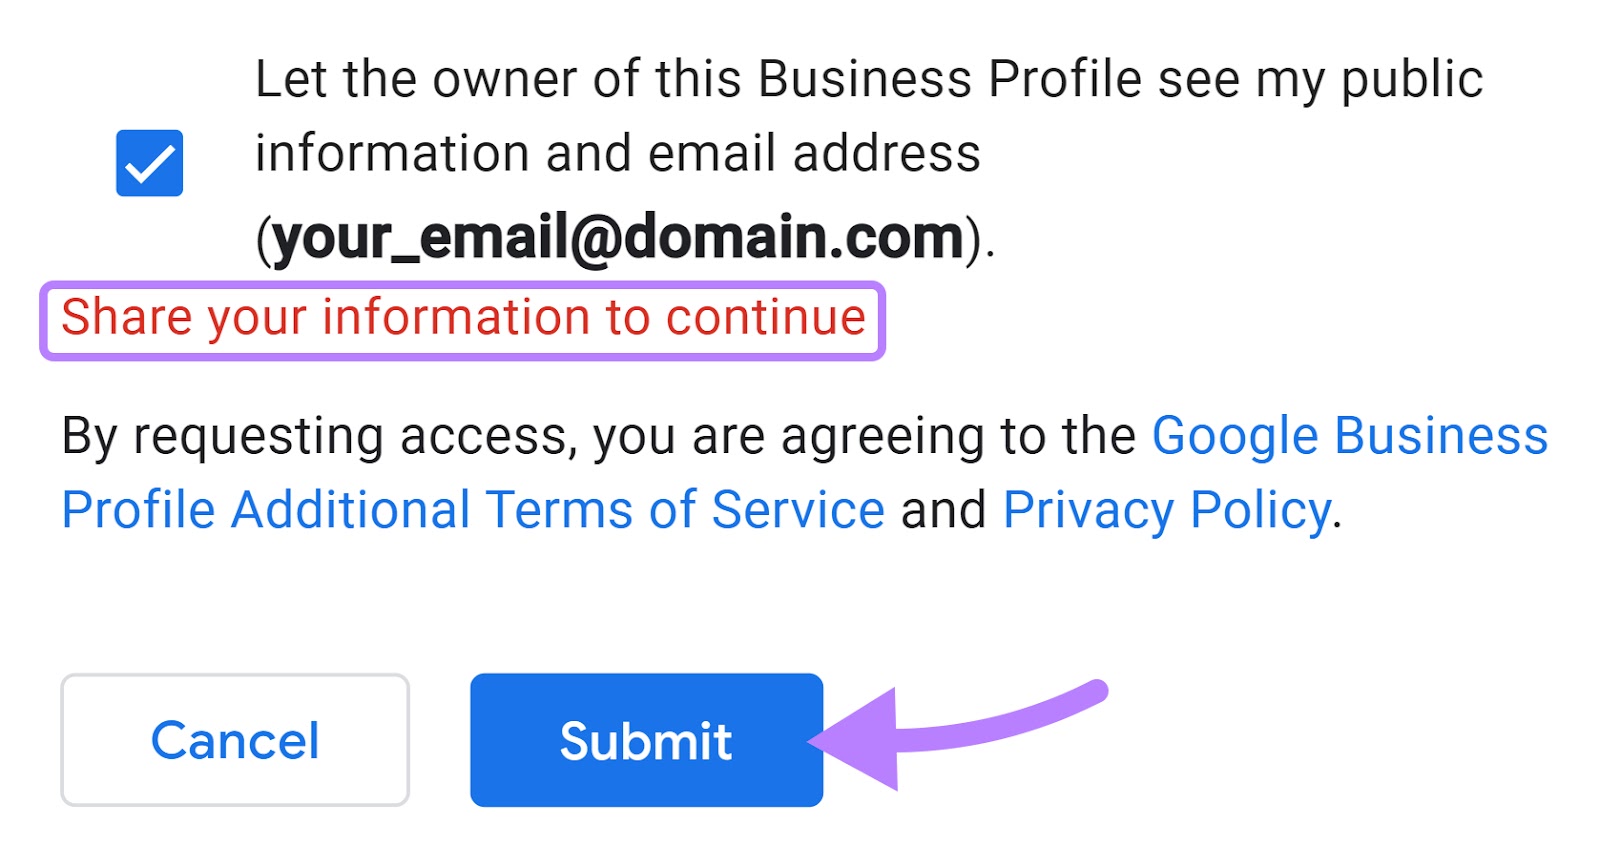 Submit your request to Google